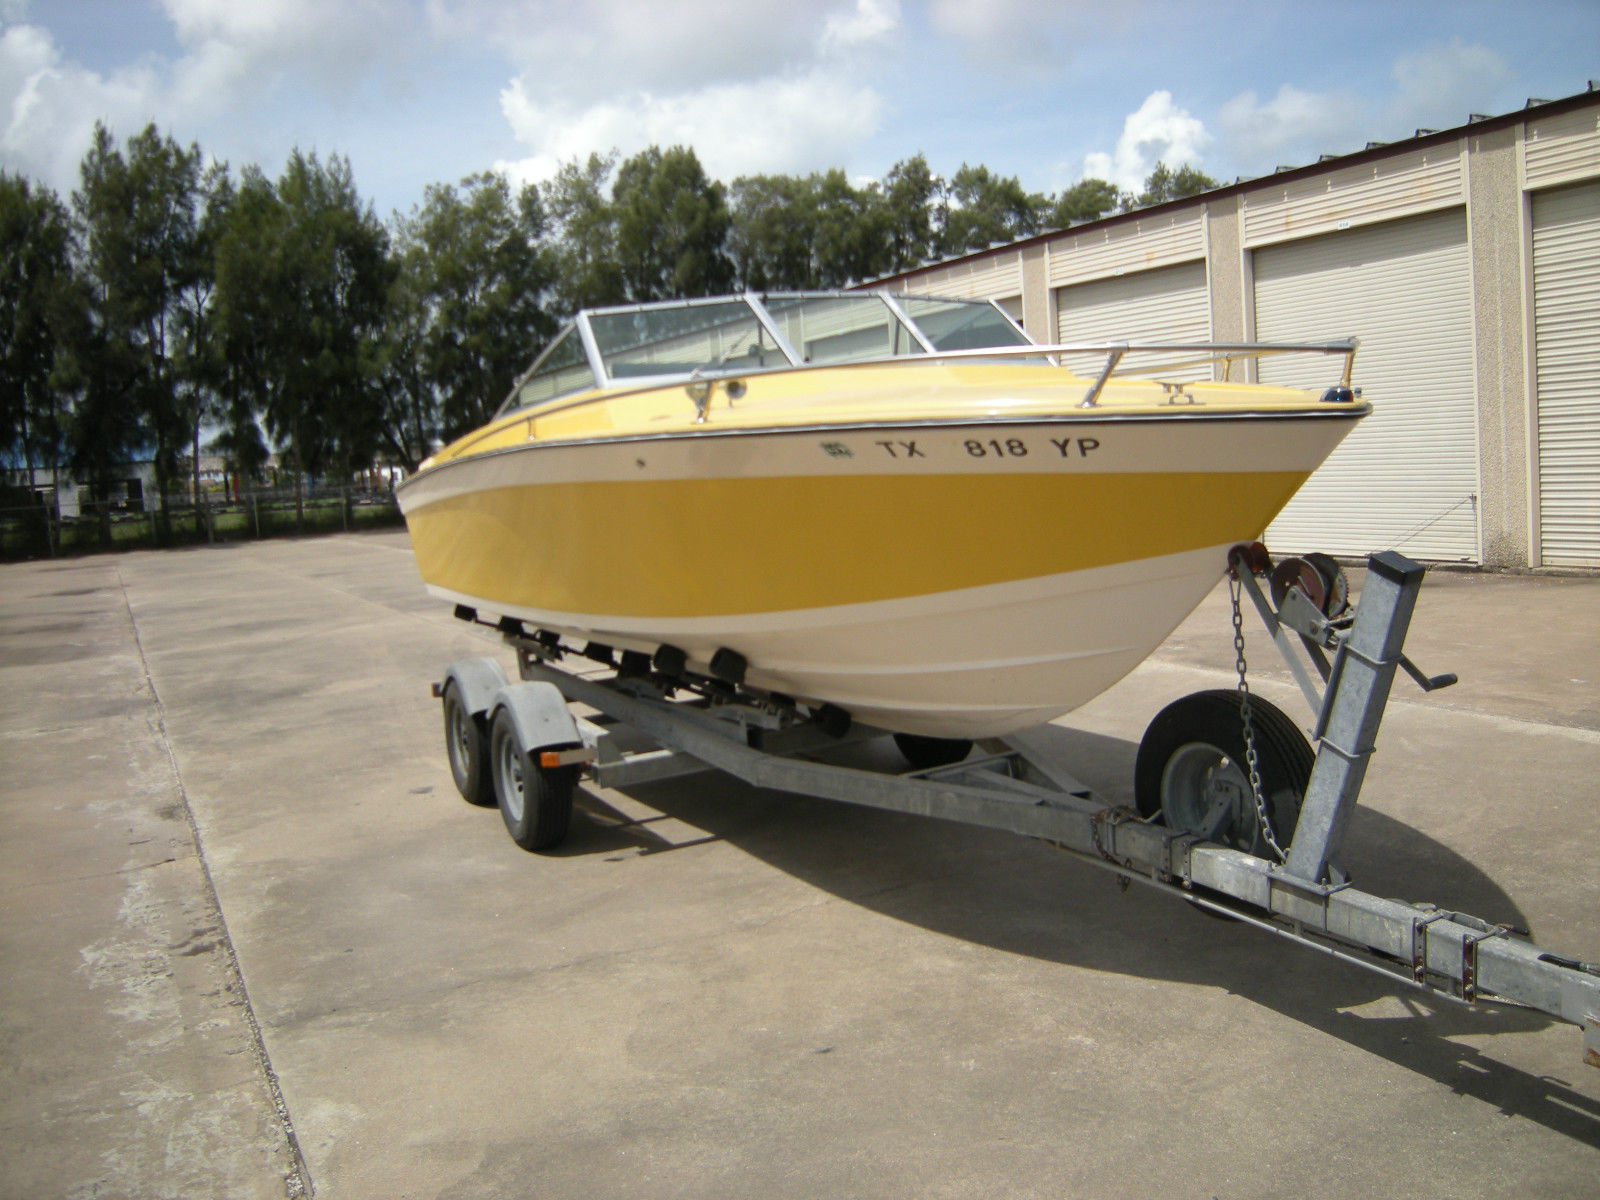 Formula F200 1974 for sale for $8,500 - Boats-from-USA.com